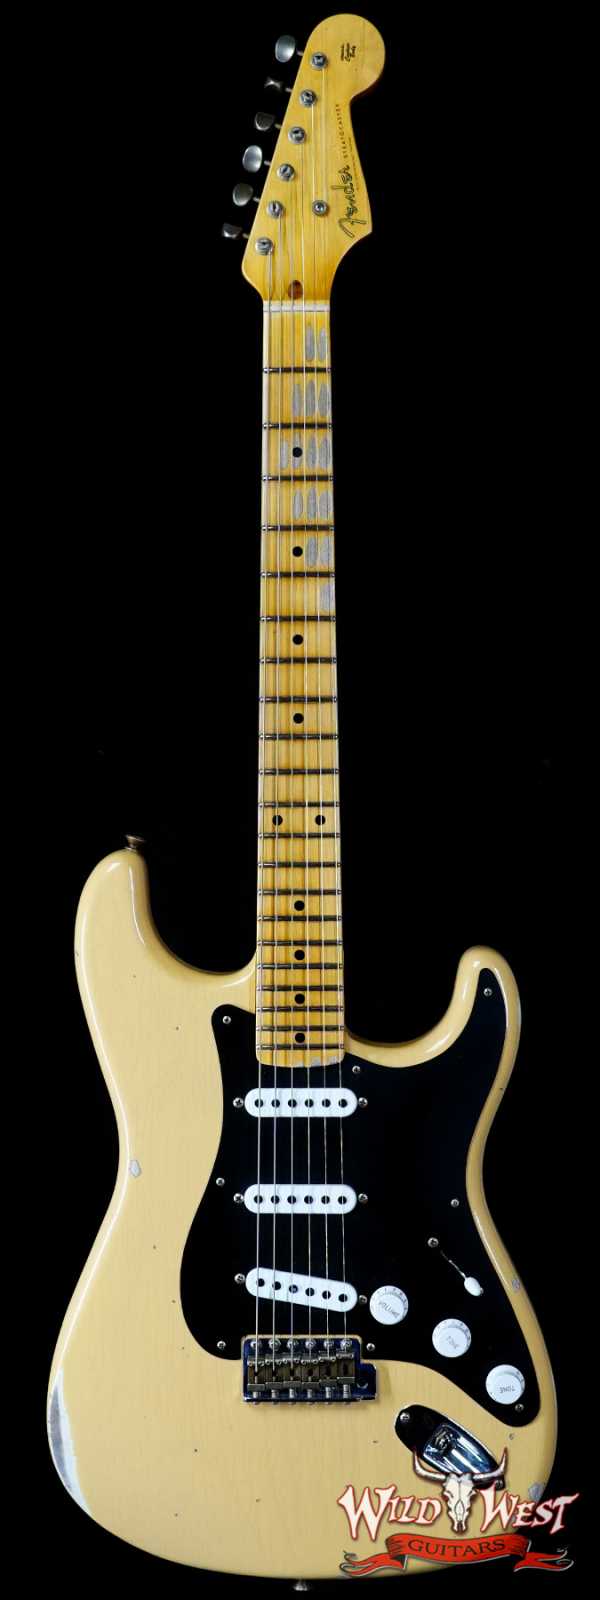 Fender Custom Shop Limited Edition 70th Anniversary 1954 Stratocaster Relic Nocaster Blonde with Black Pickguard 7.55 LBS